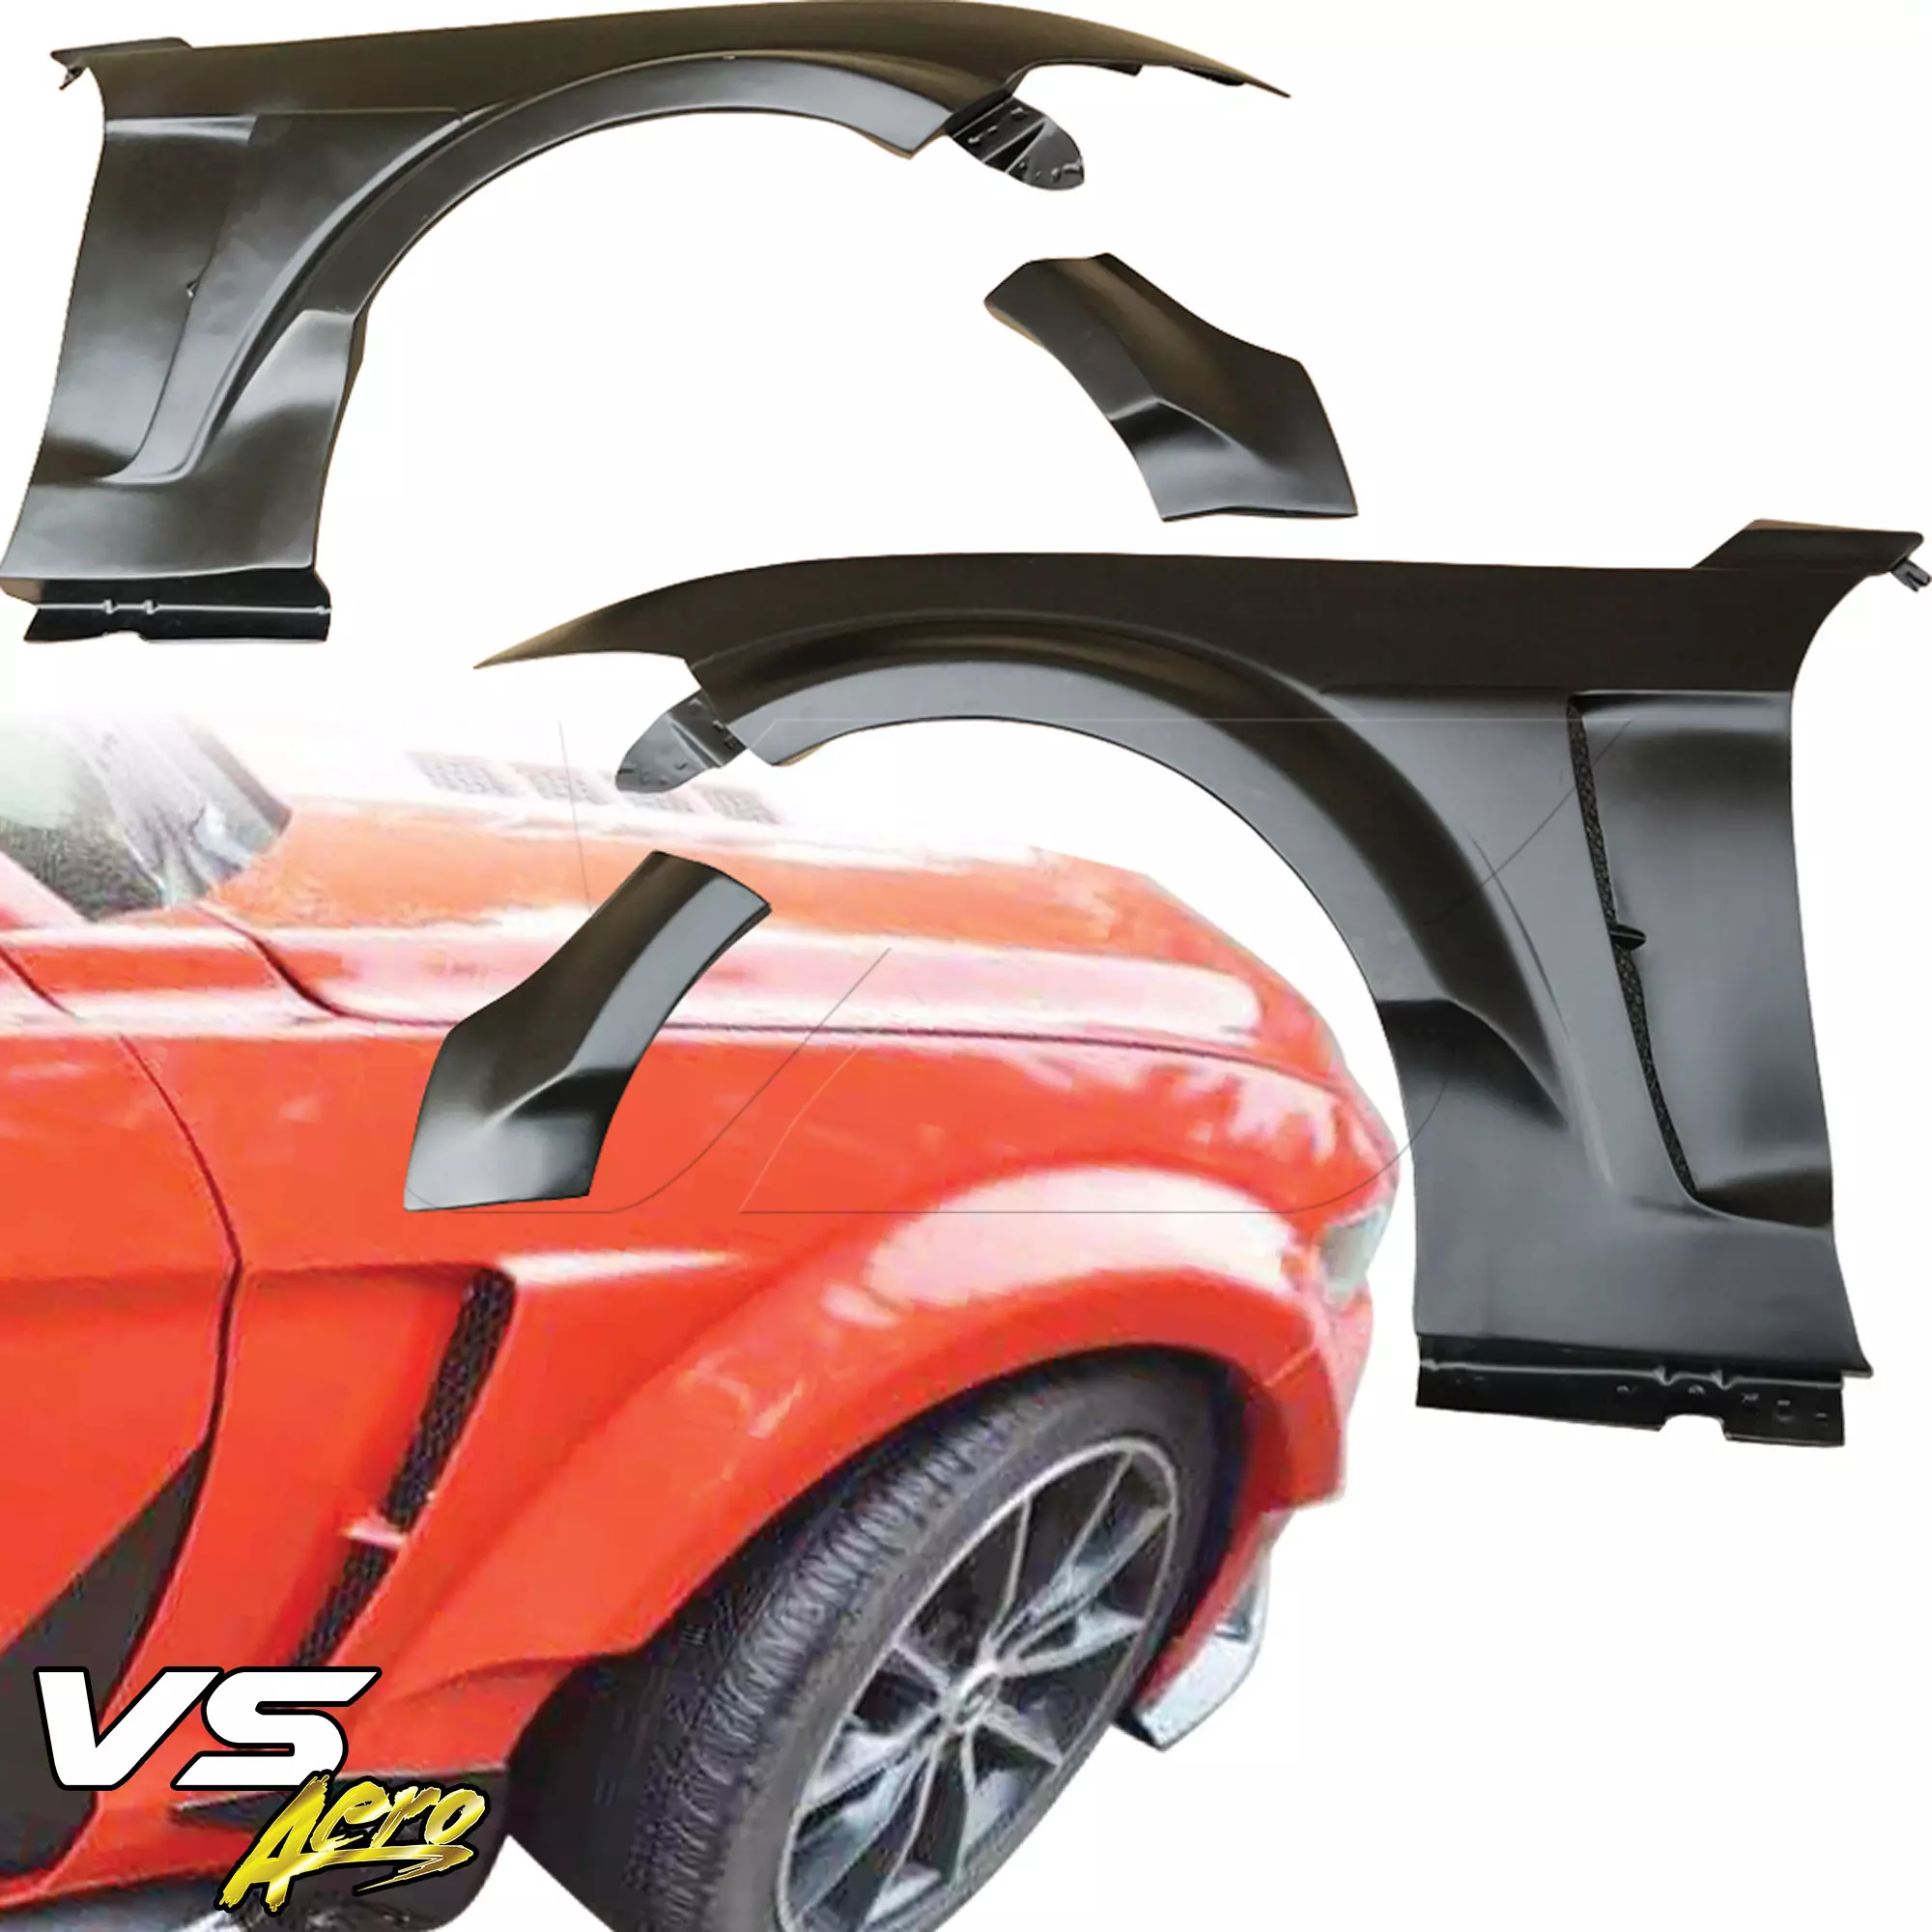 VSaero FRP KTOT Wide Body Fenders (front) > Ford Mustang 2015-2020 - Image 13